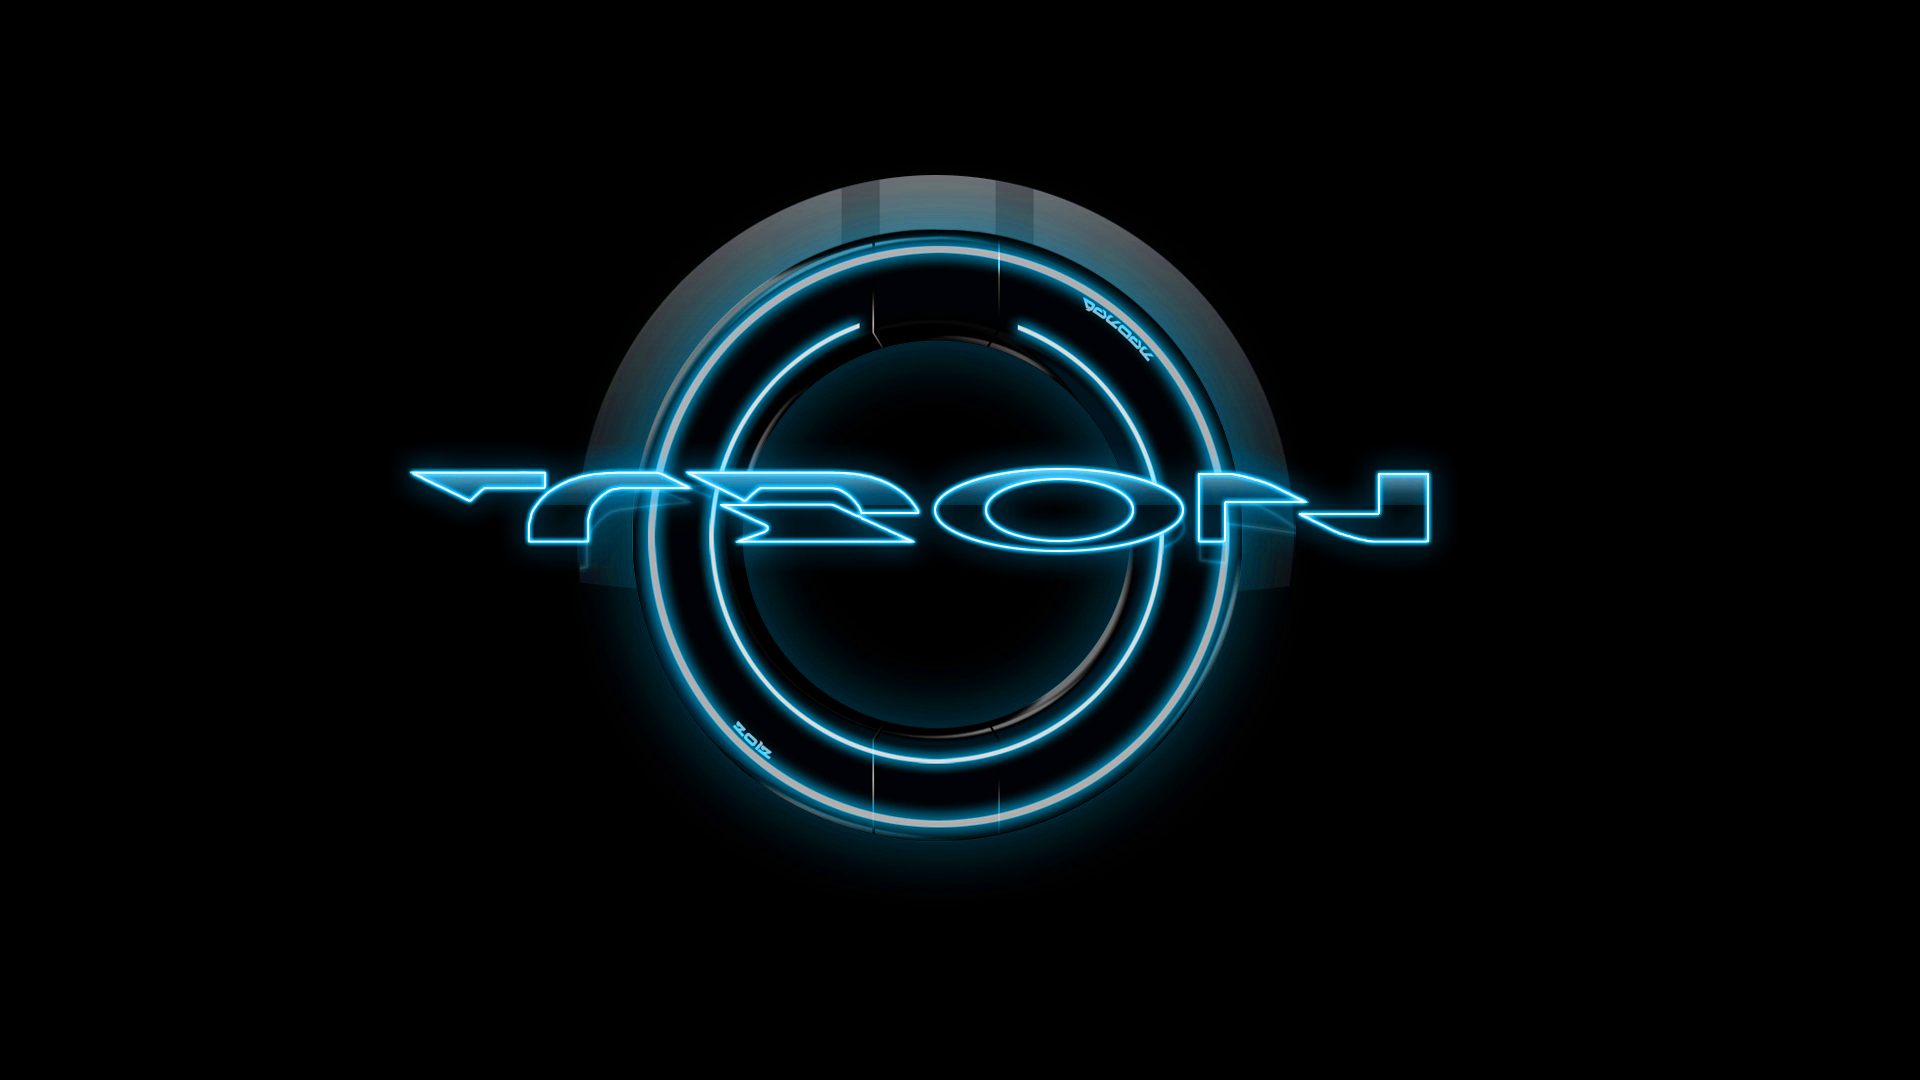 WinCustomize: Explore : Wallpapers : Disc of TRON